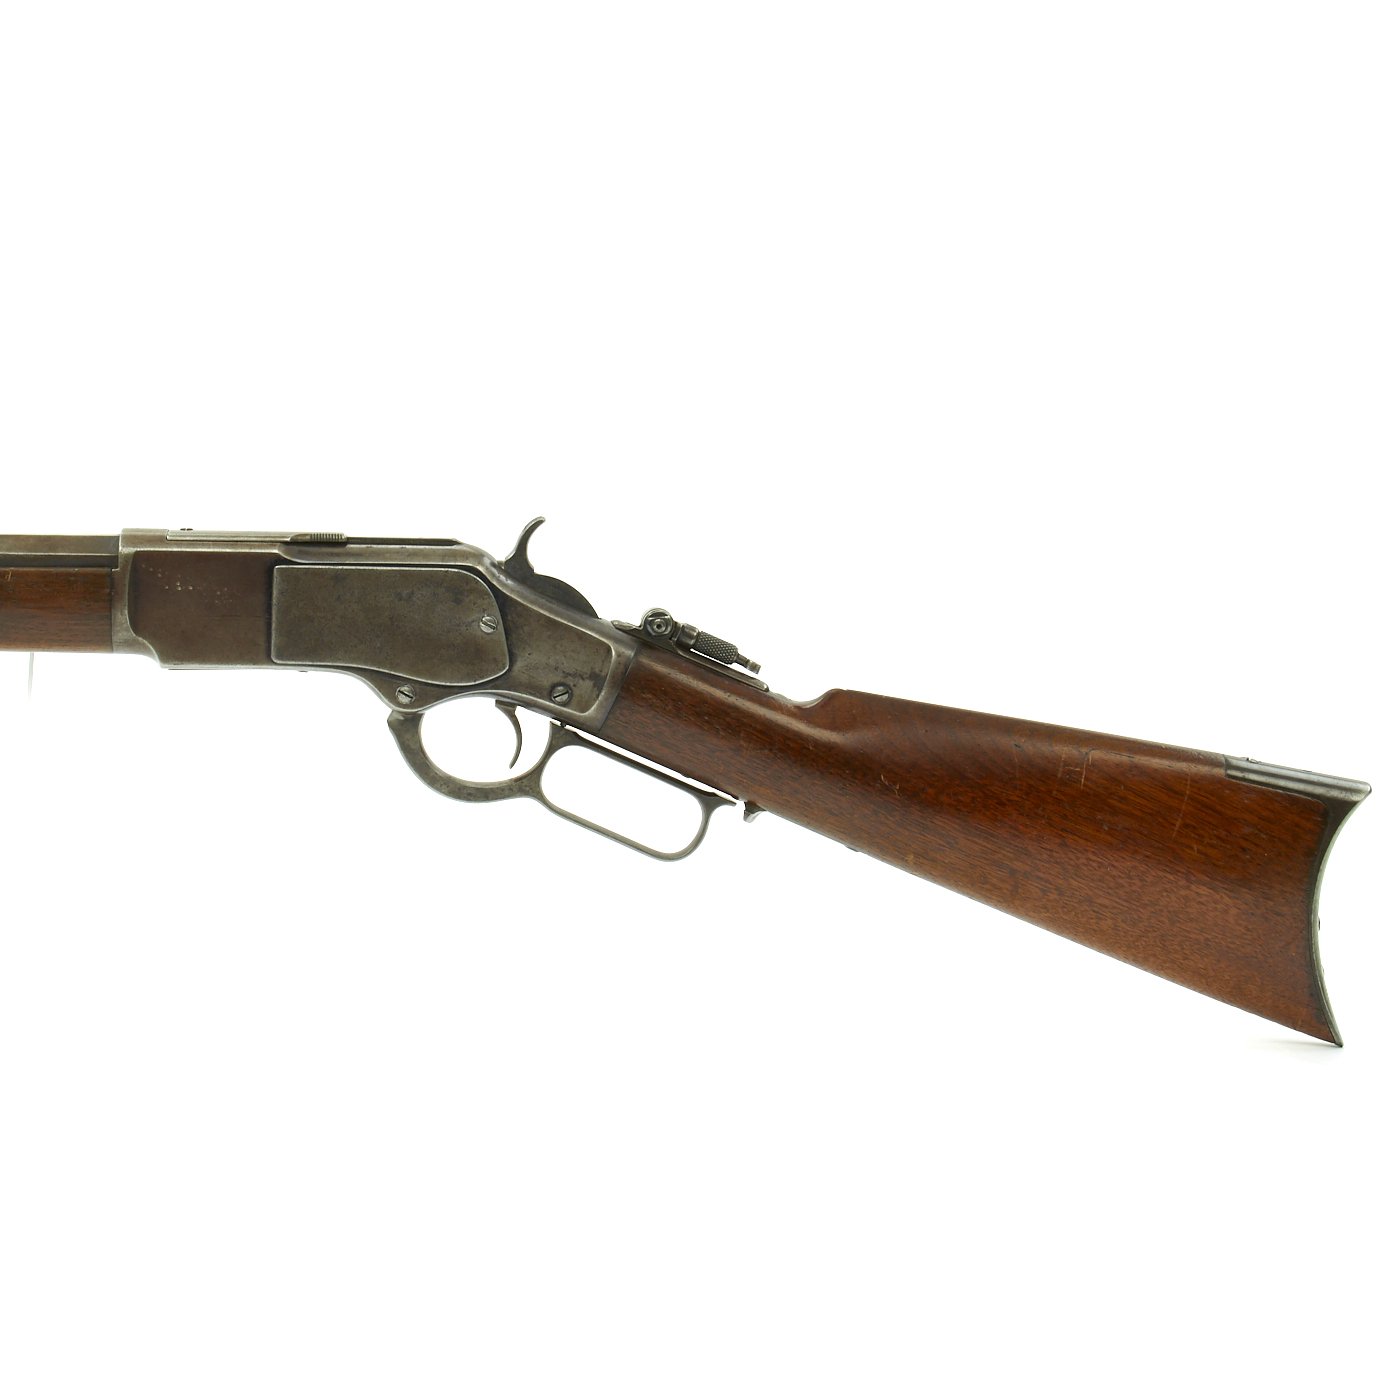 1873 Winchester Rifle and Carbine - Fort Smith National Historic